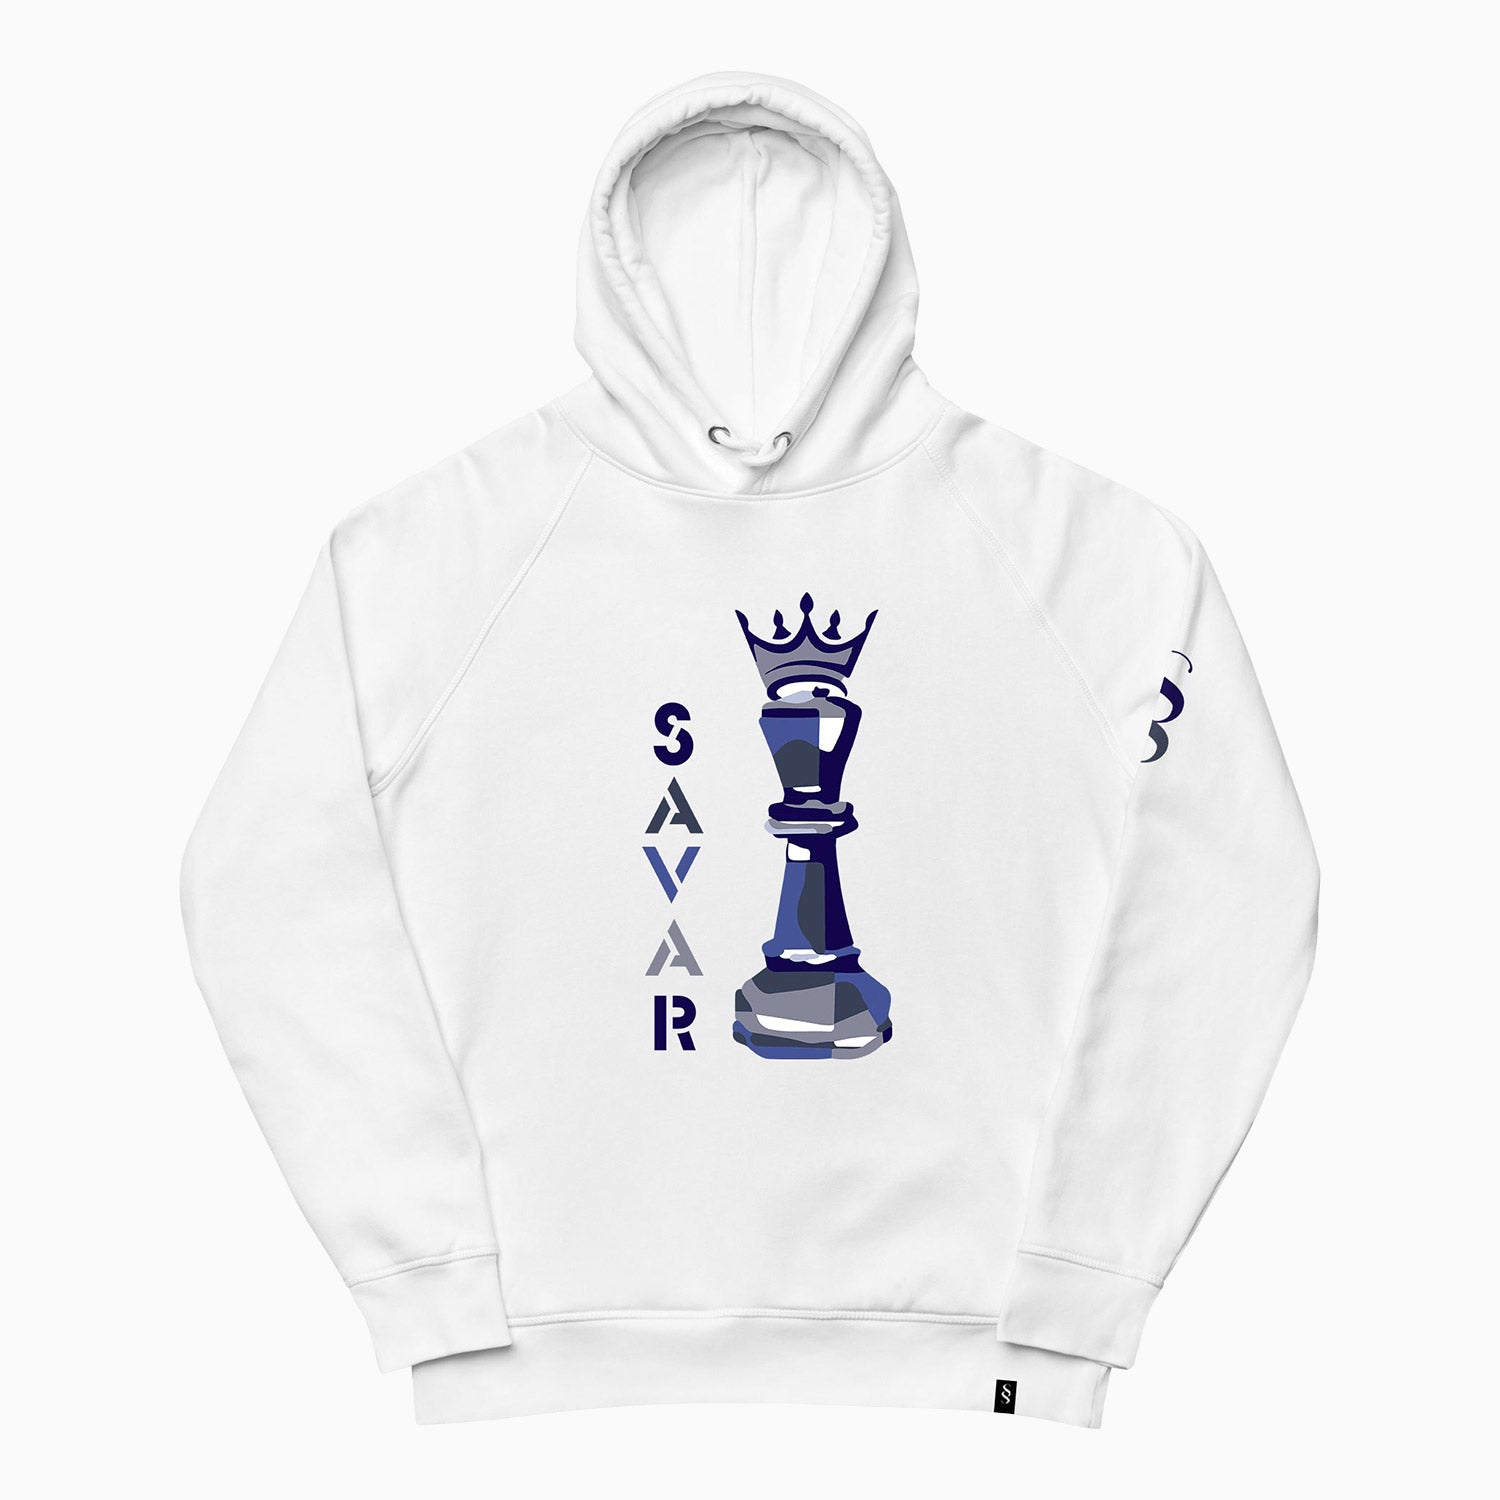 chess-design-printed-pull-over-hoodie-for-men-sh101-100